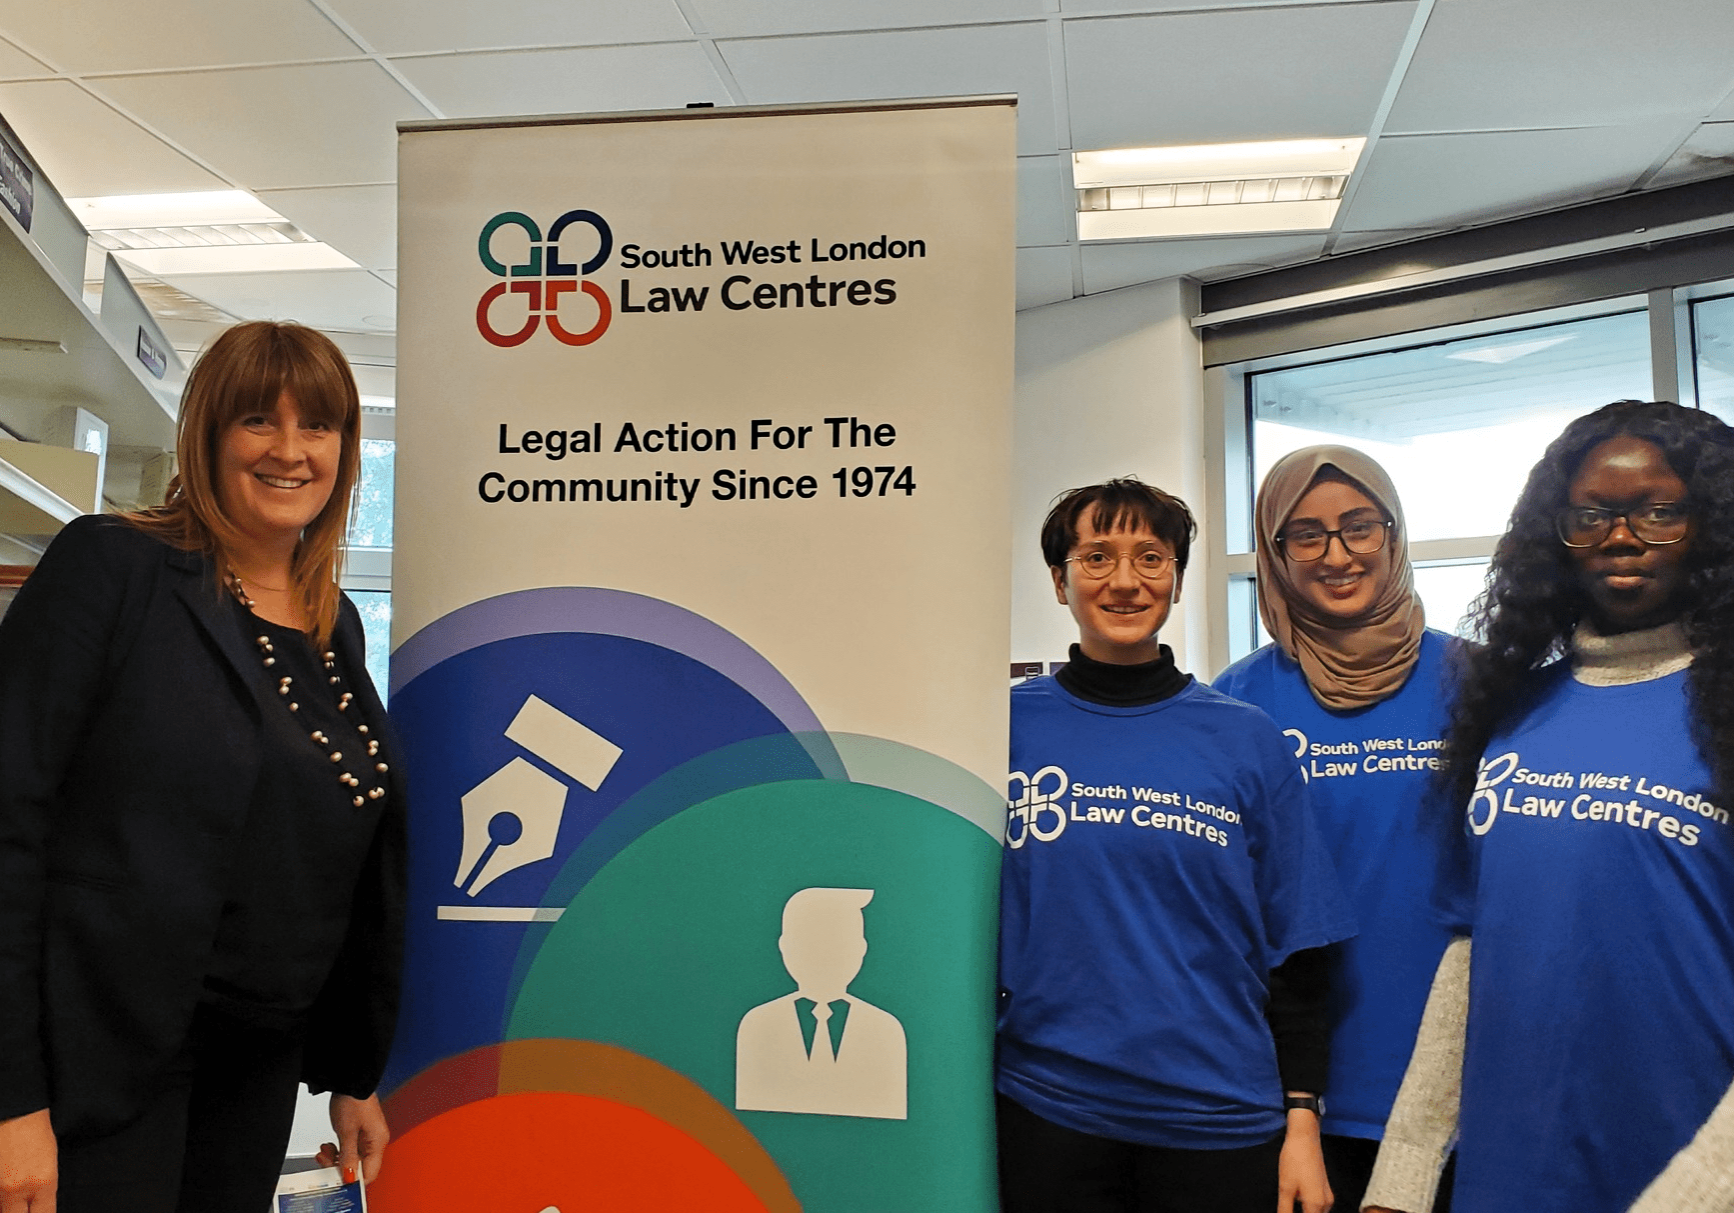 South West London Law Centres staff